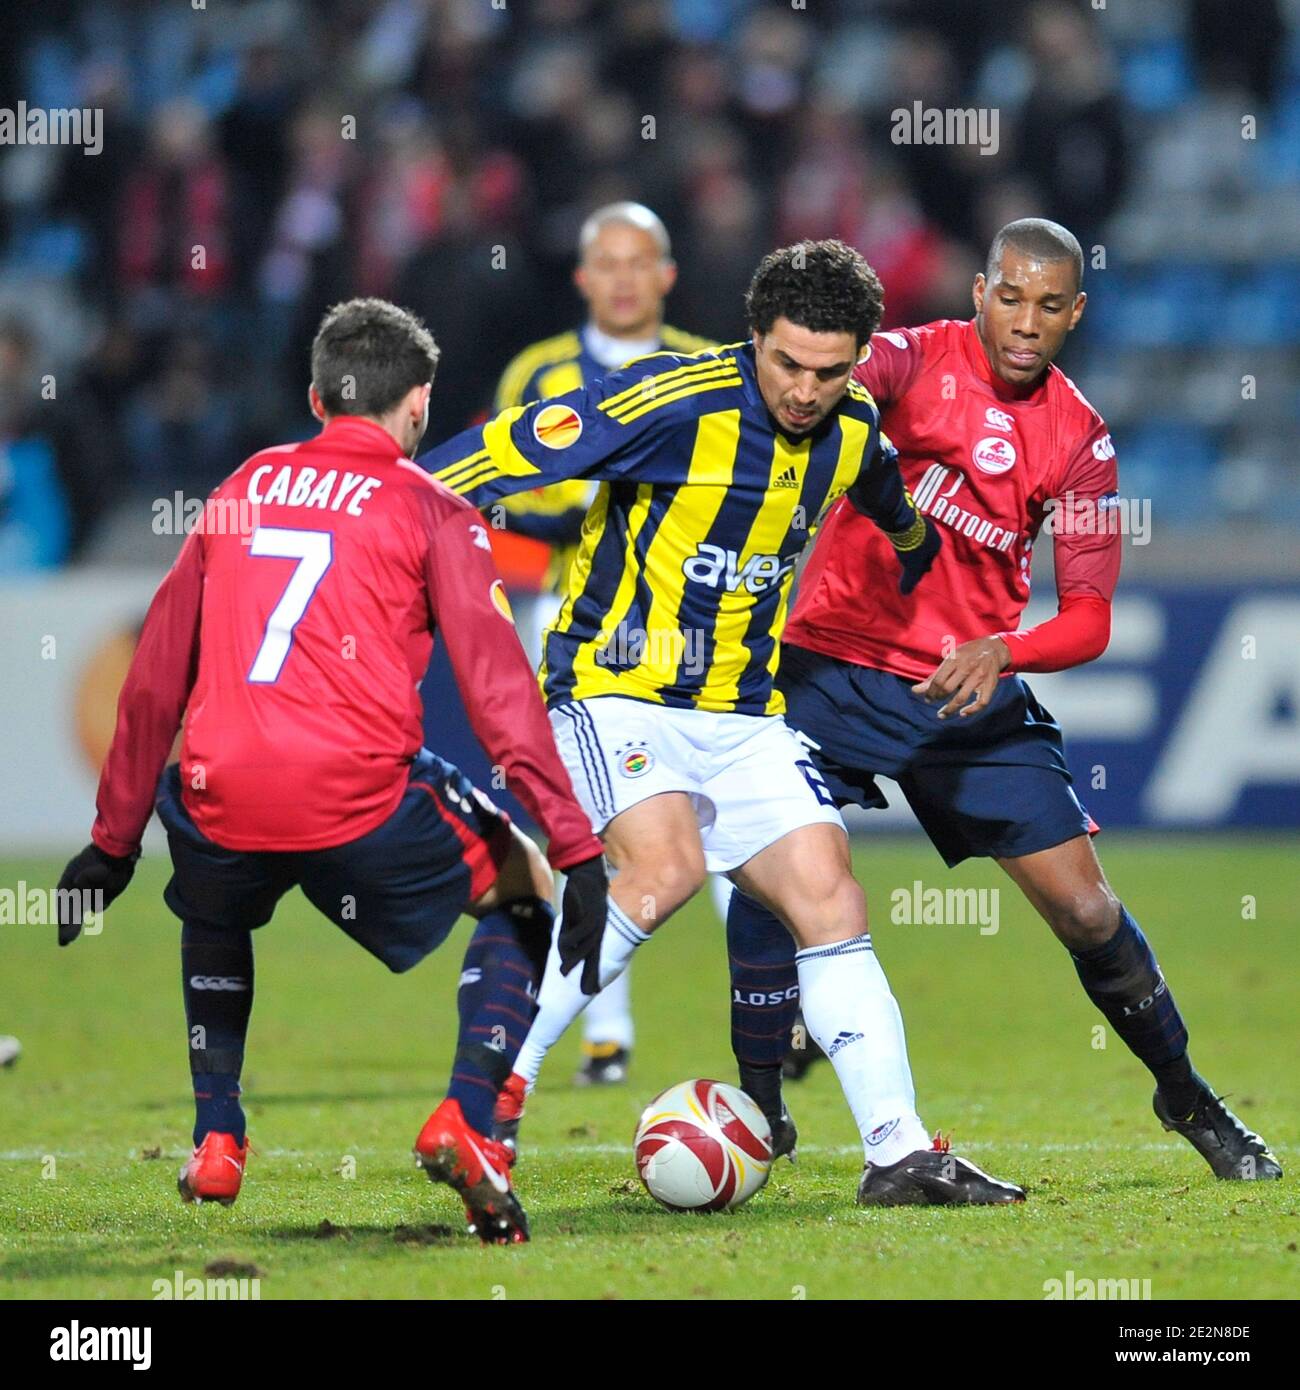 Lille's Yohan Cabaye, Emerson and Fenerbahce's Mehmet Topuz during the UEFA Europa League soccer match, LOSC Lille Metropole vs Fenerbahce SK at the Stadium Nord in Villeneuve d'Ascq, France on February 18, 2010. Lille won 2-1. Photo by Stephane Reix/ABACAPRESS.COM Stock Photo